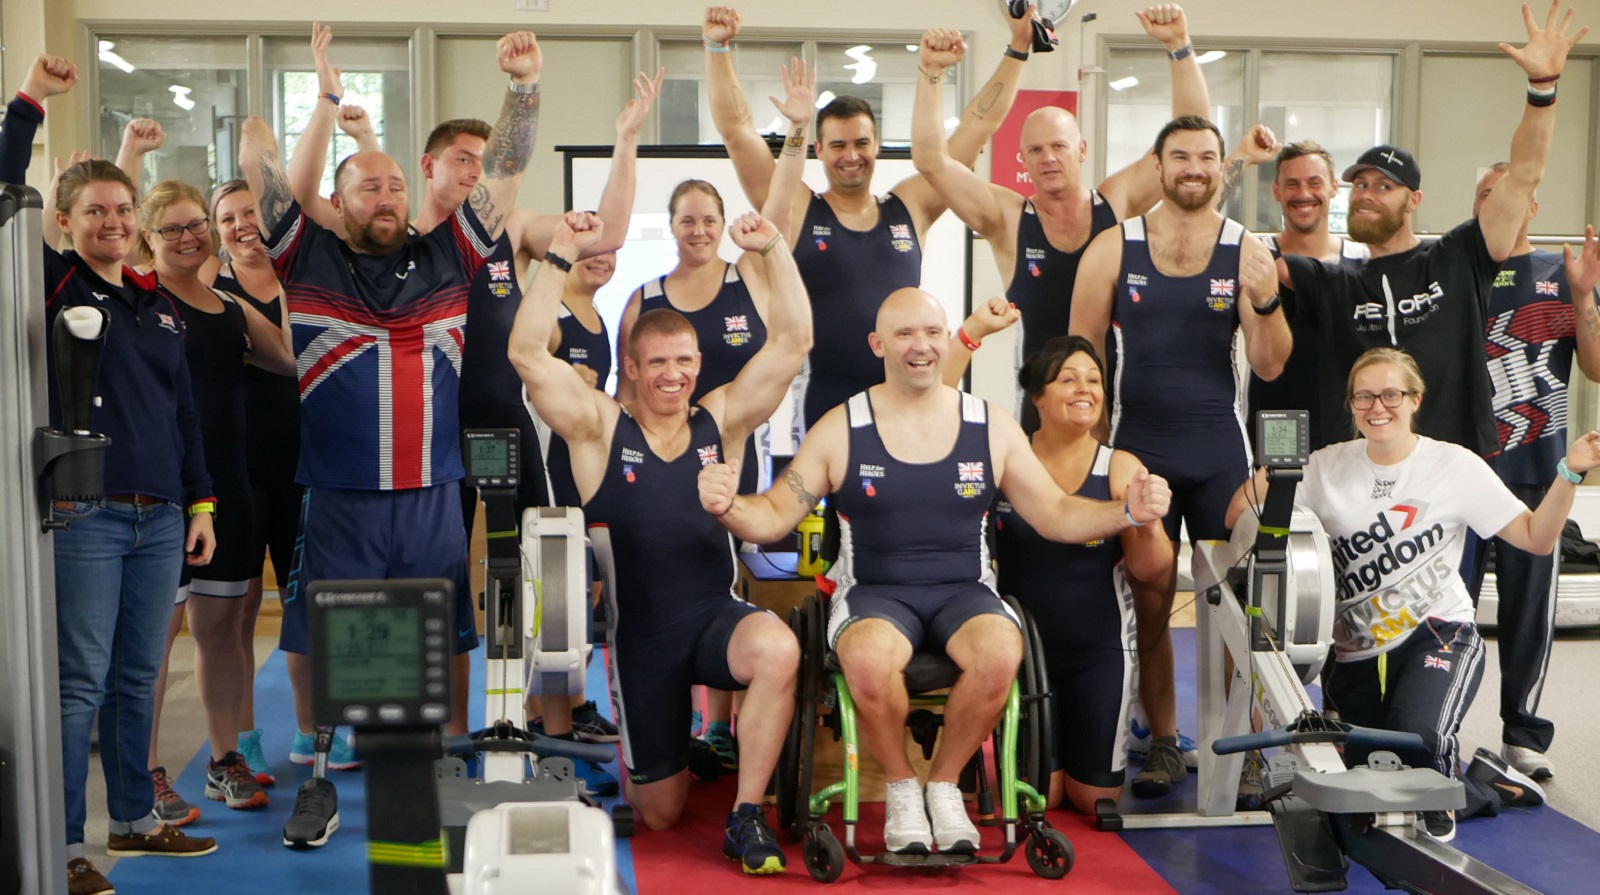 10 medals at the Invictus Games for Team UK athletes British Rowing